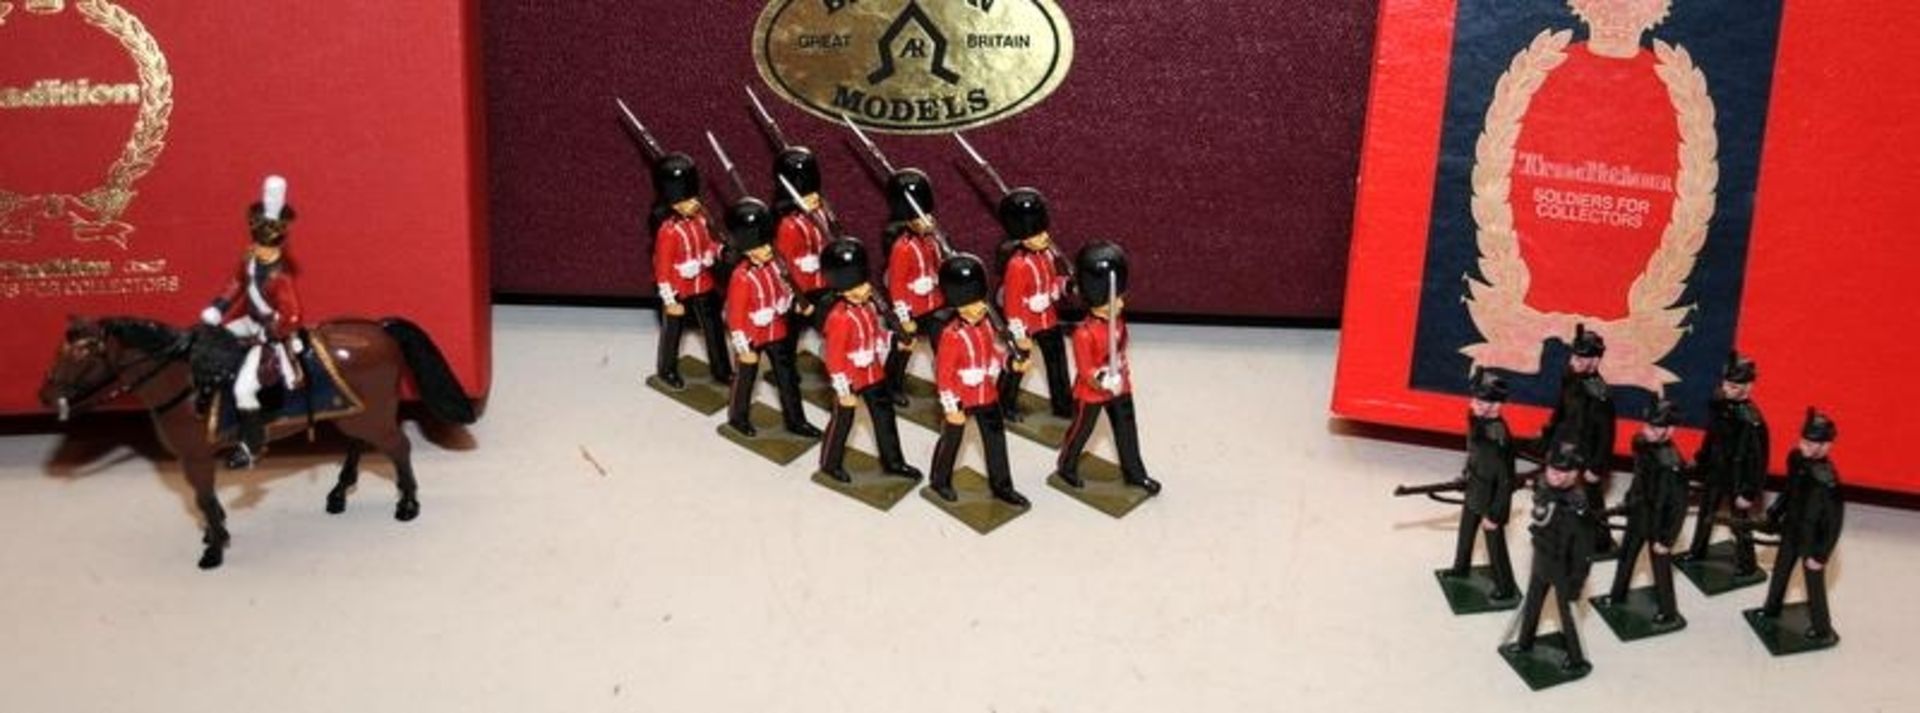 Tradition toy soldiers British Mounted Field Officer Infantry of the Line 1812 ref:BIM. Boxed.